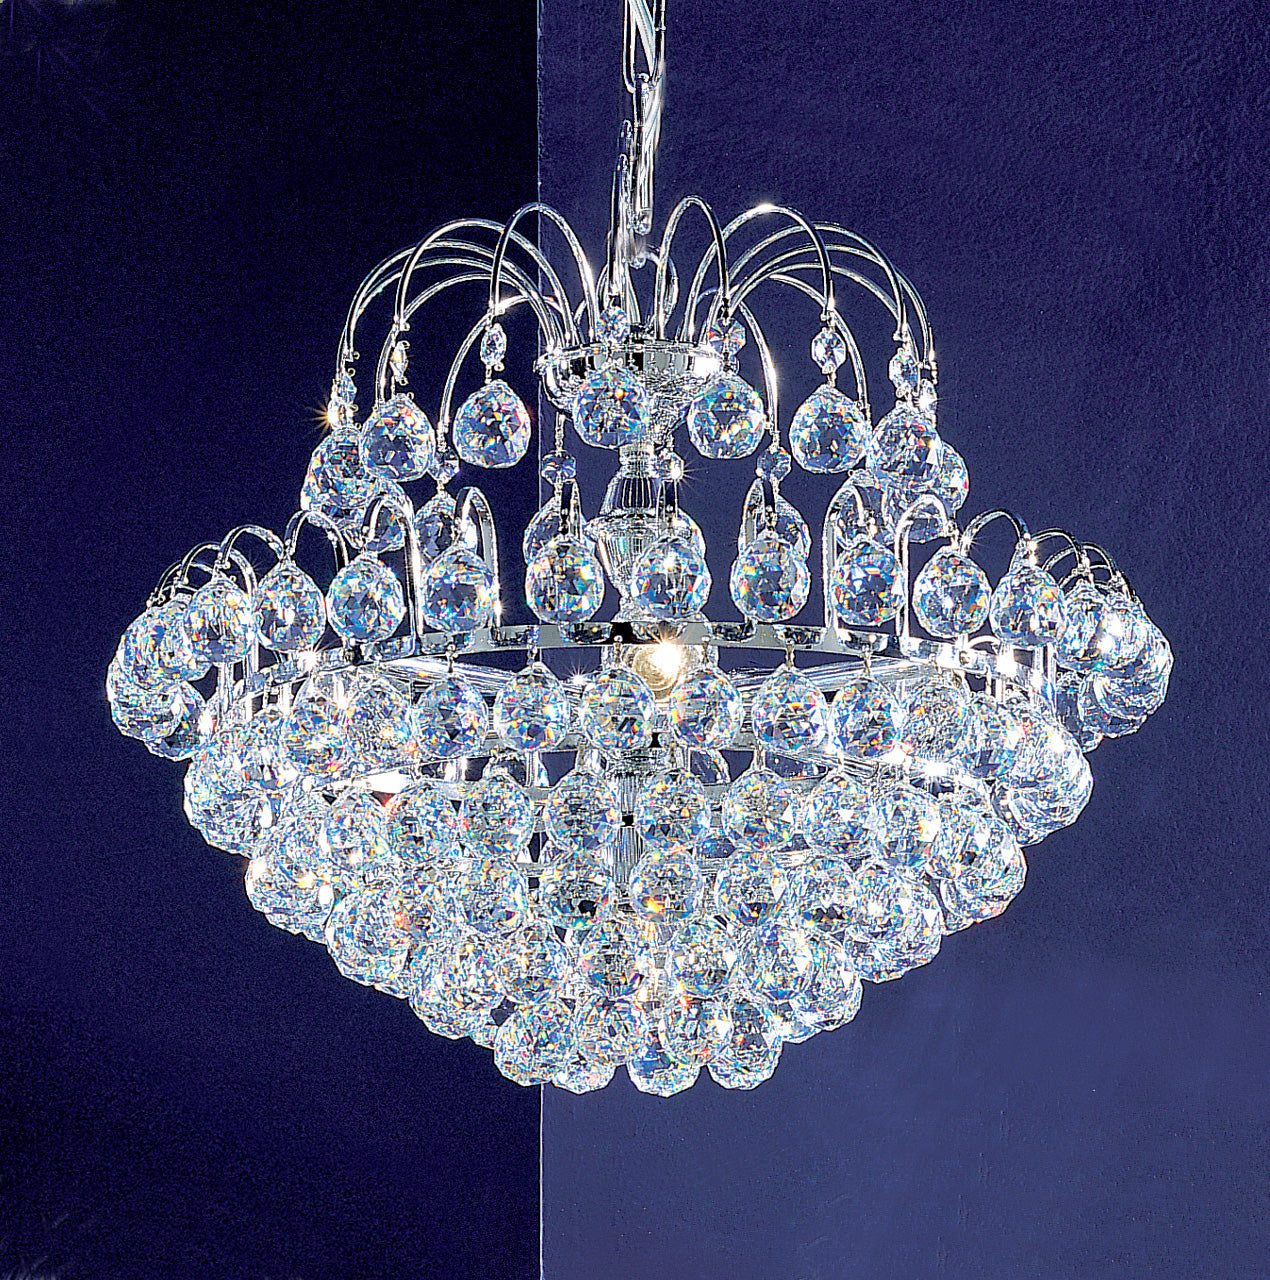 Classic Lighting 1895 CH S Diamante Crystal Chandelier in Chrome (Imported from Spain)